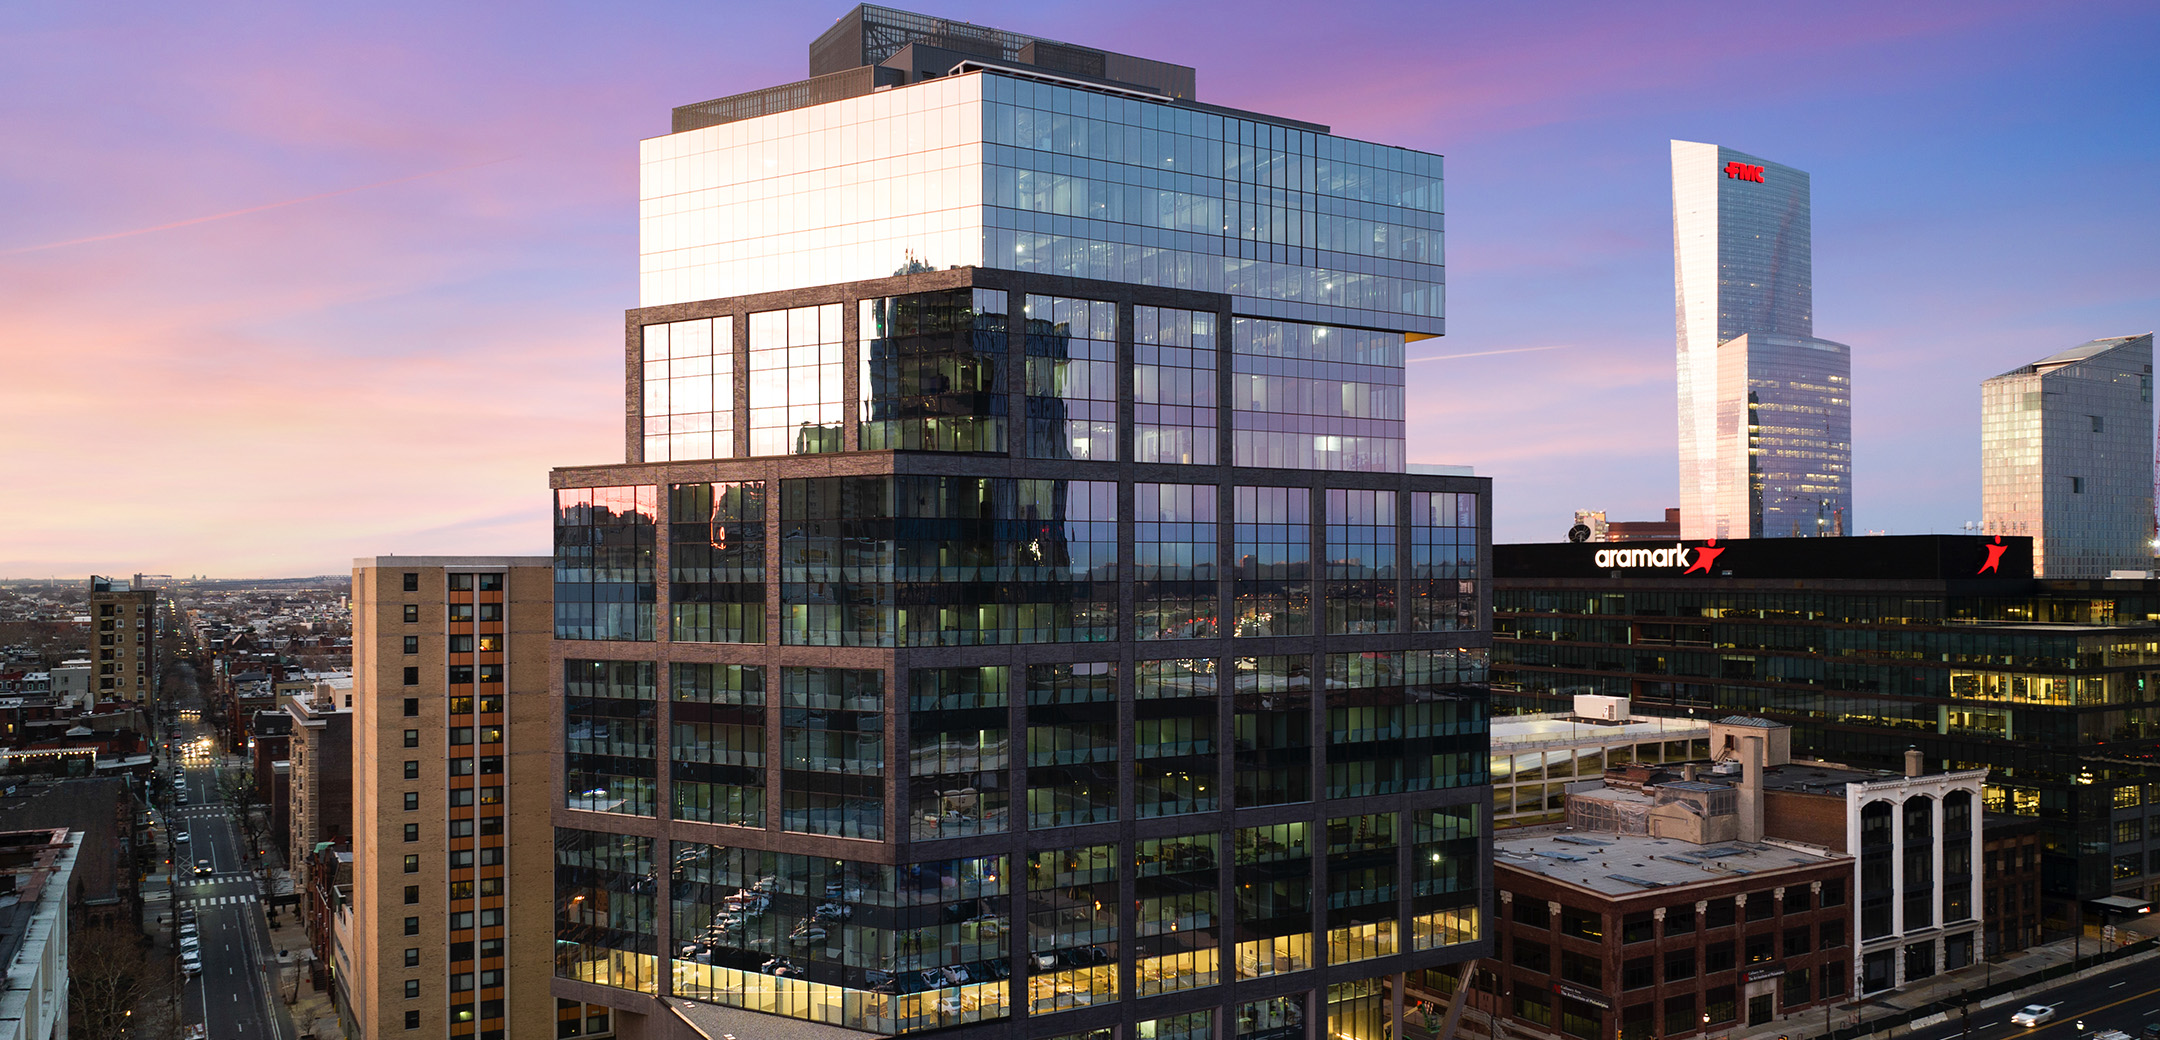 The exterior view of 2222 Market Street featuring a glass facade and the city of Philadelphia in the background